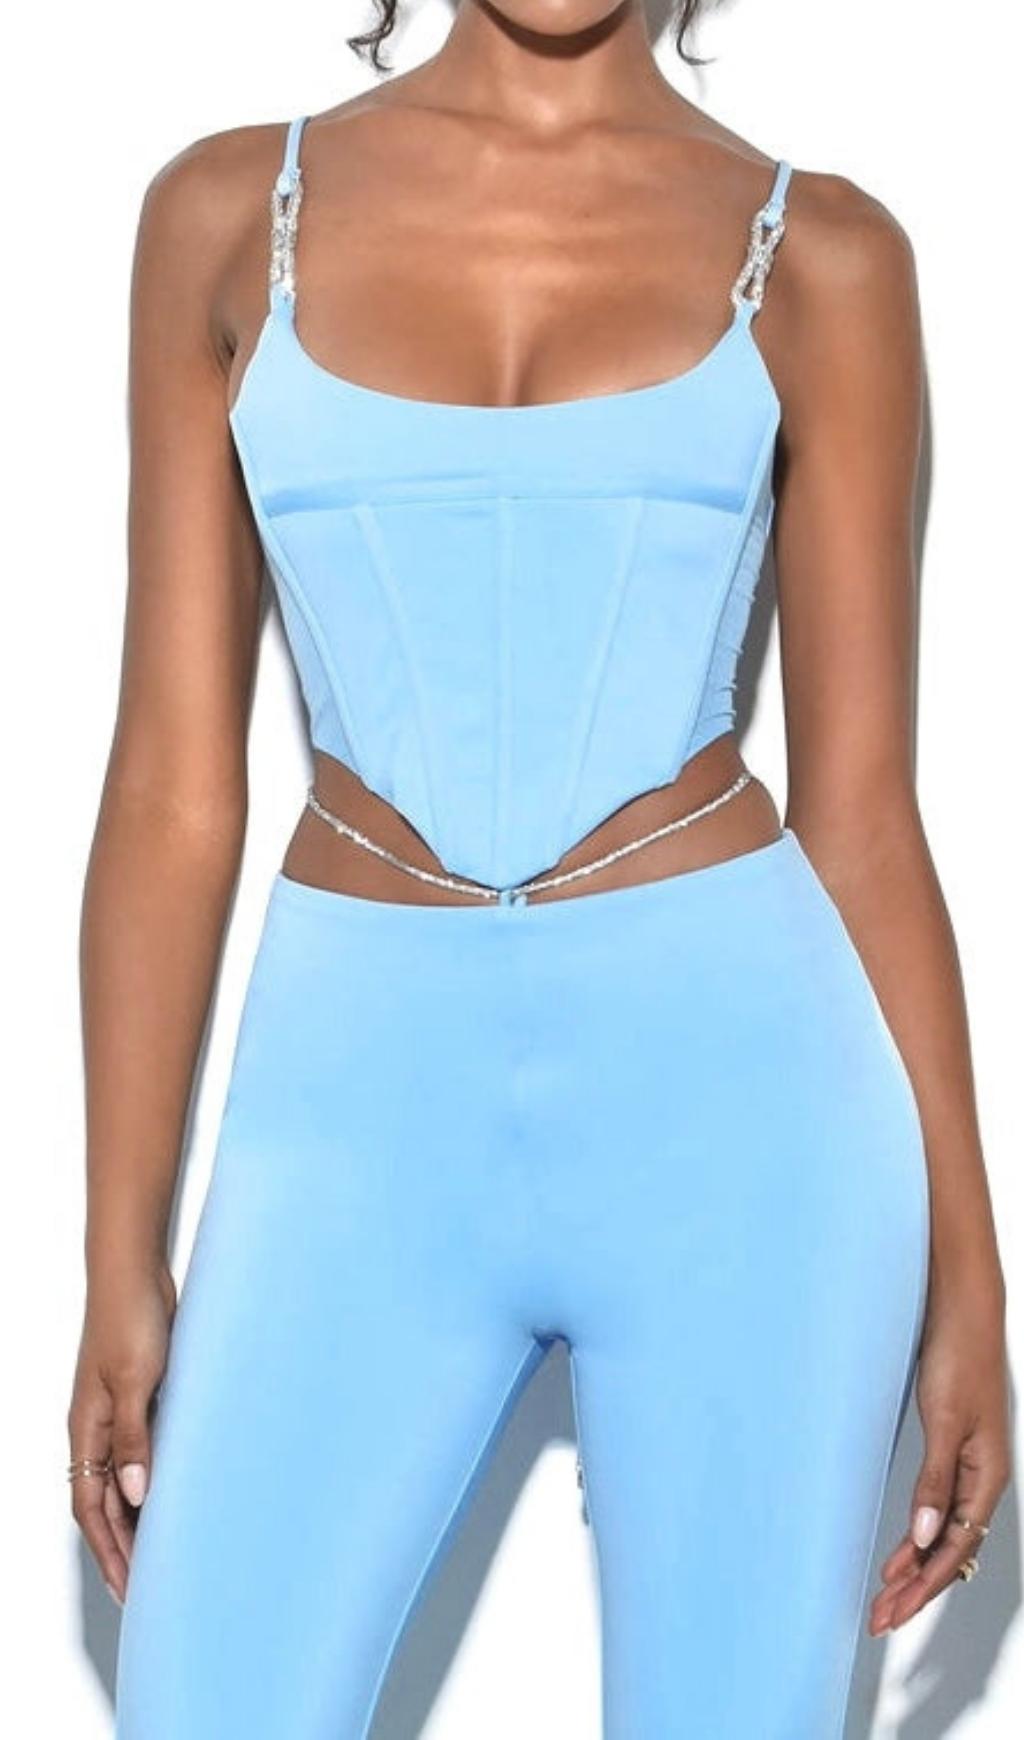 CORSET CAMISOLE TWO-PIECE SUIT IN BLUE